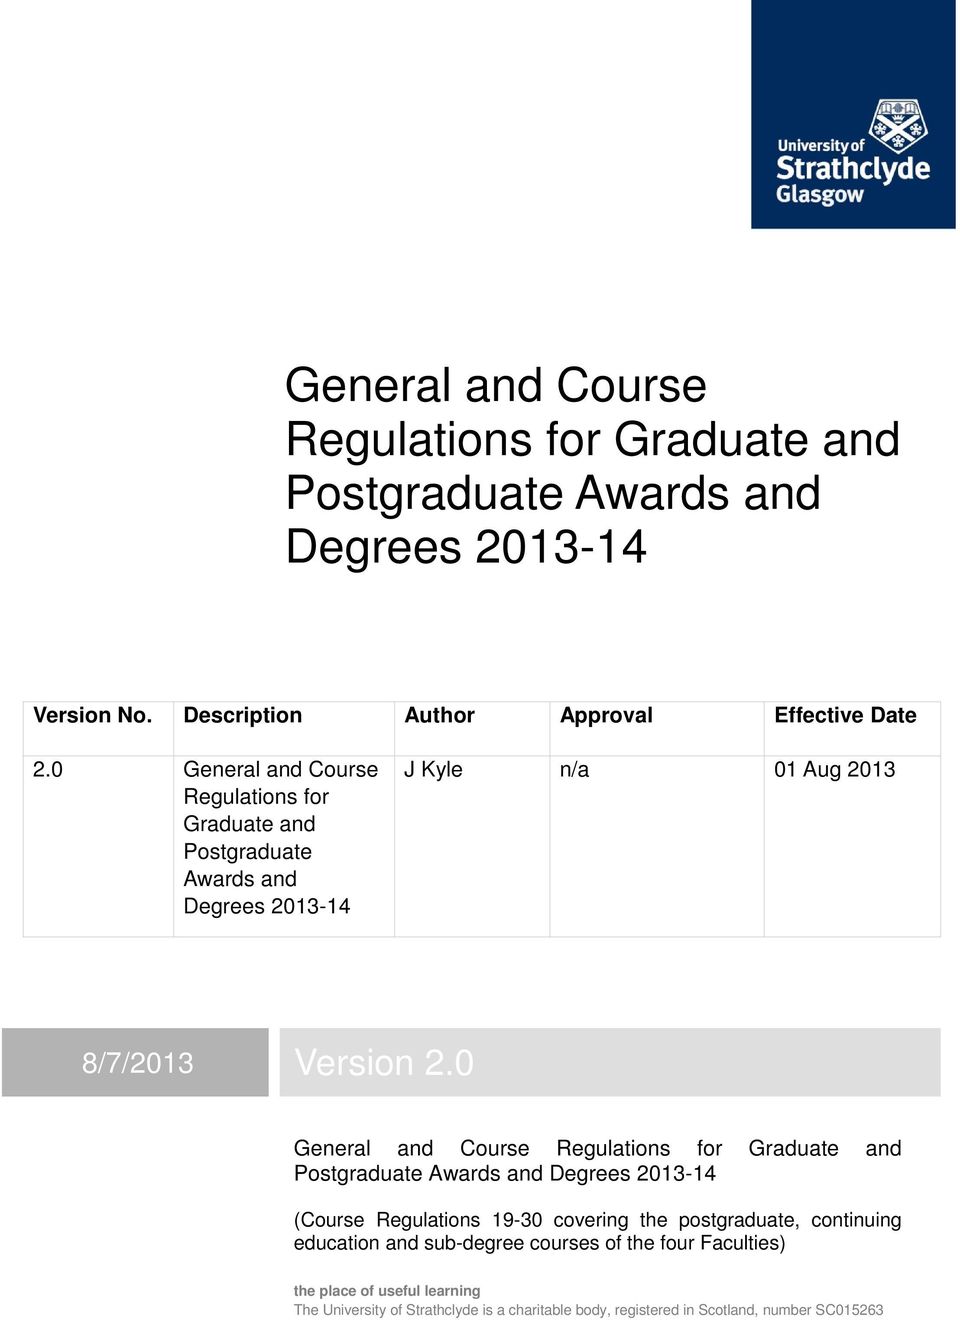 0 General and Course Regulations for Graduate and Postgraduate Awards and Degrees 2013-14 (Course Regulations 19-30 covering the postgraduate,